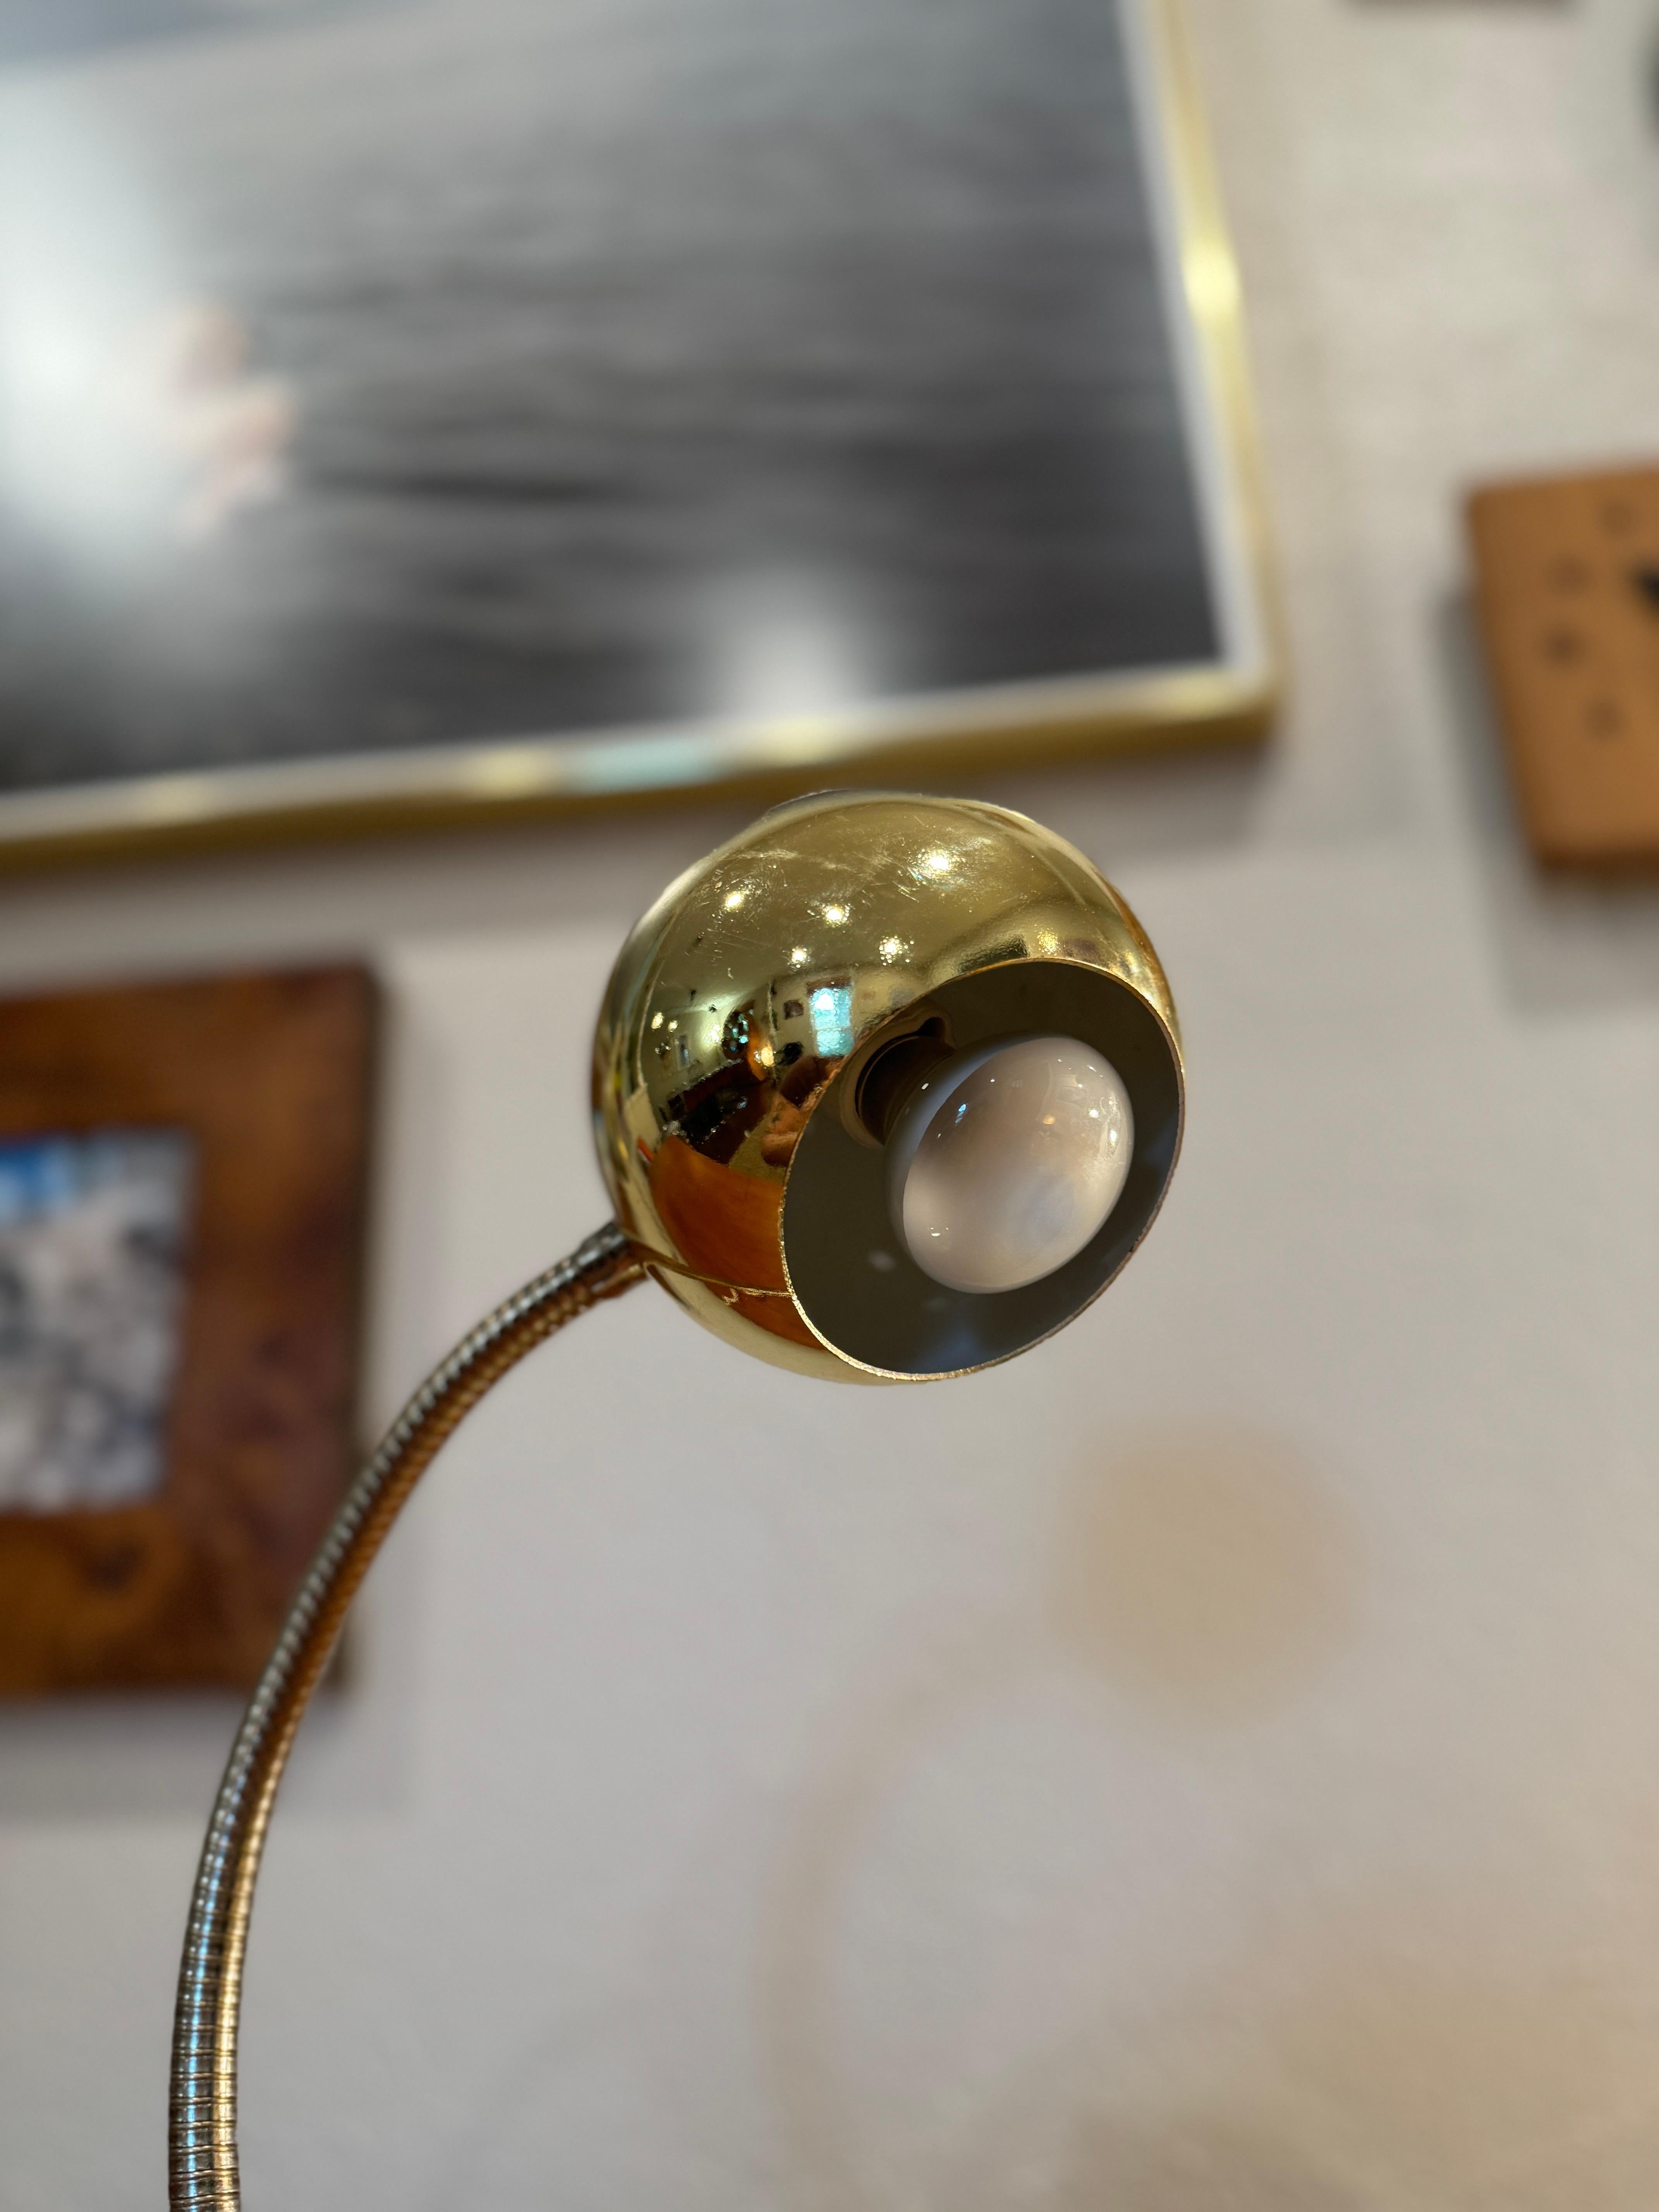 Mid century modern gold orb desk lamp circa 1960s In Good Condition For Sale In Houston, TX